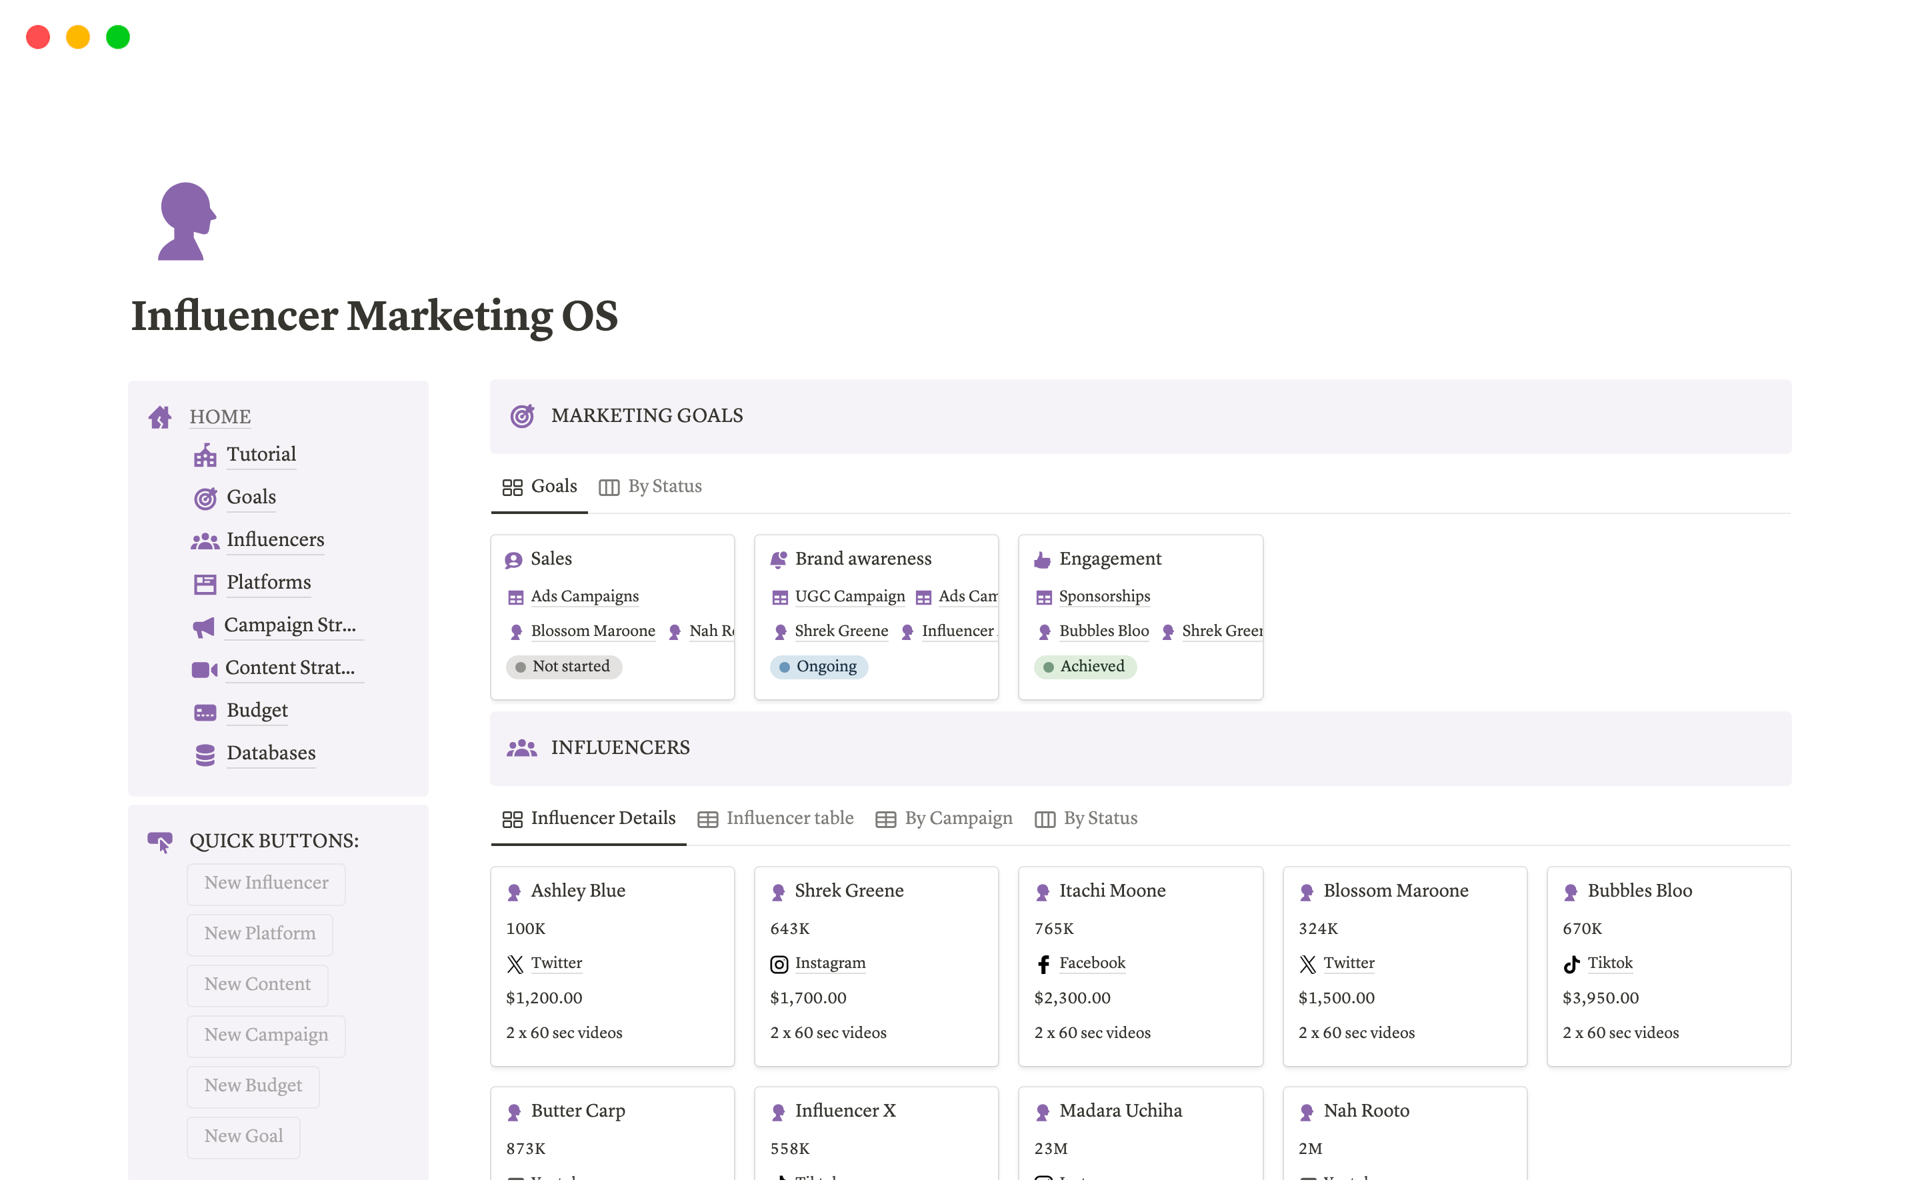 Screenshot of Best 10 Campaign Calendar Templates for Marketing Communications Managers collection by Notion